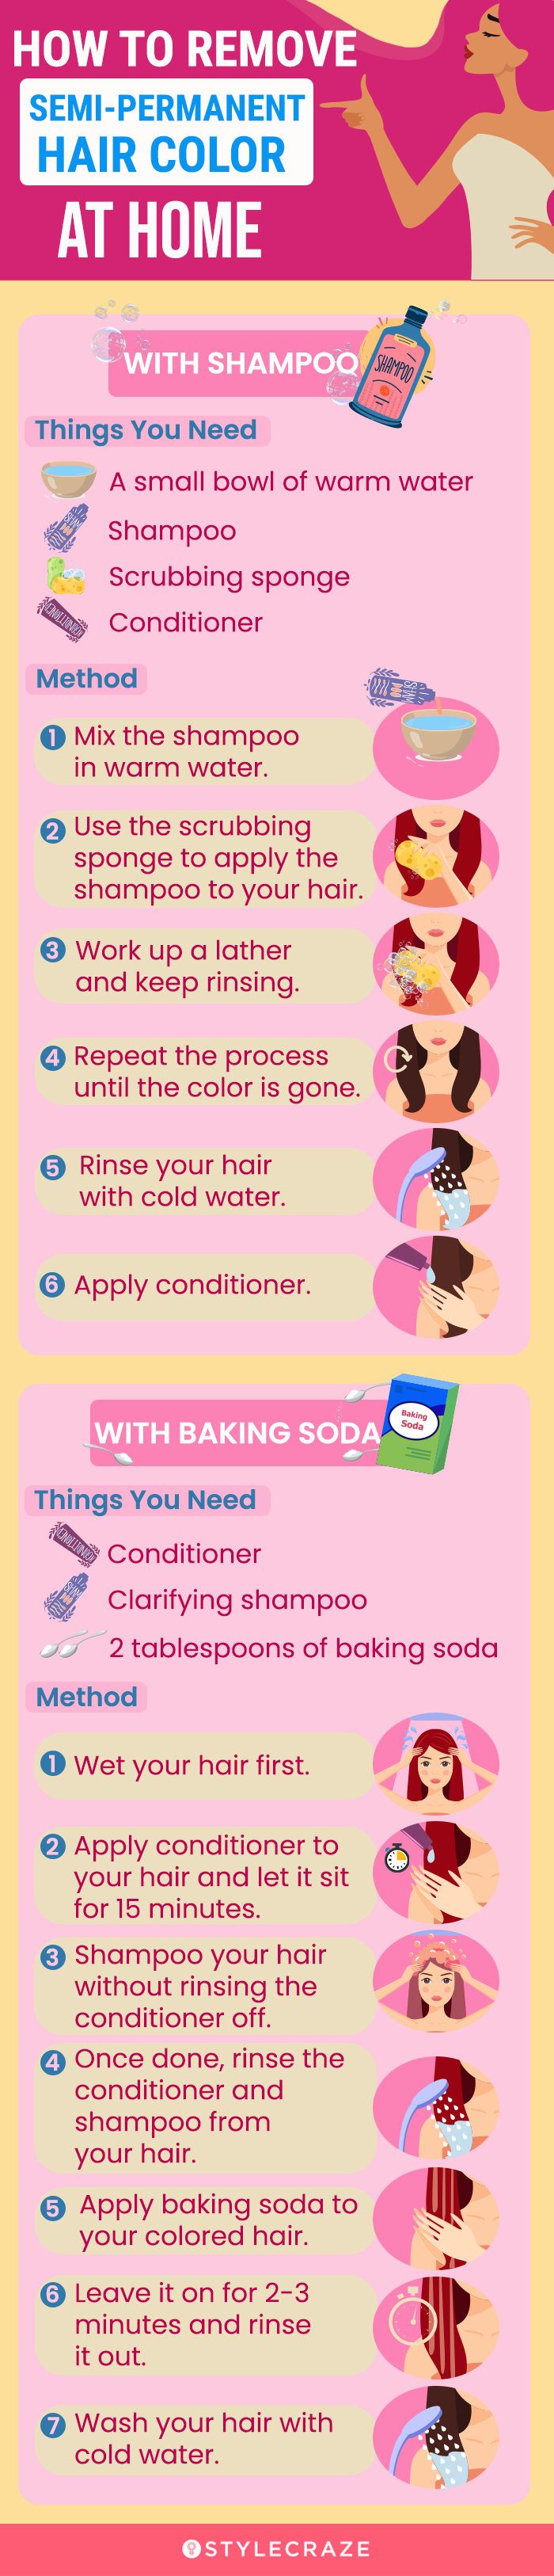 how to remove semi permanent hair color at home (infographic)